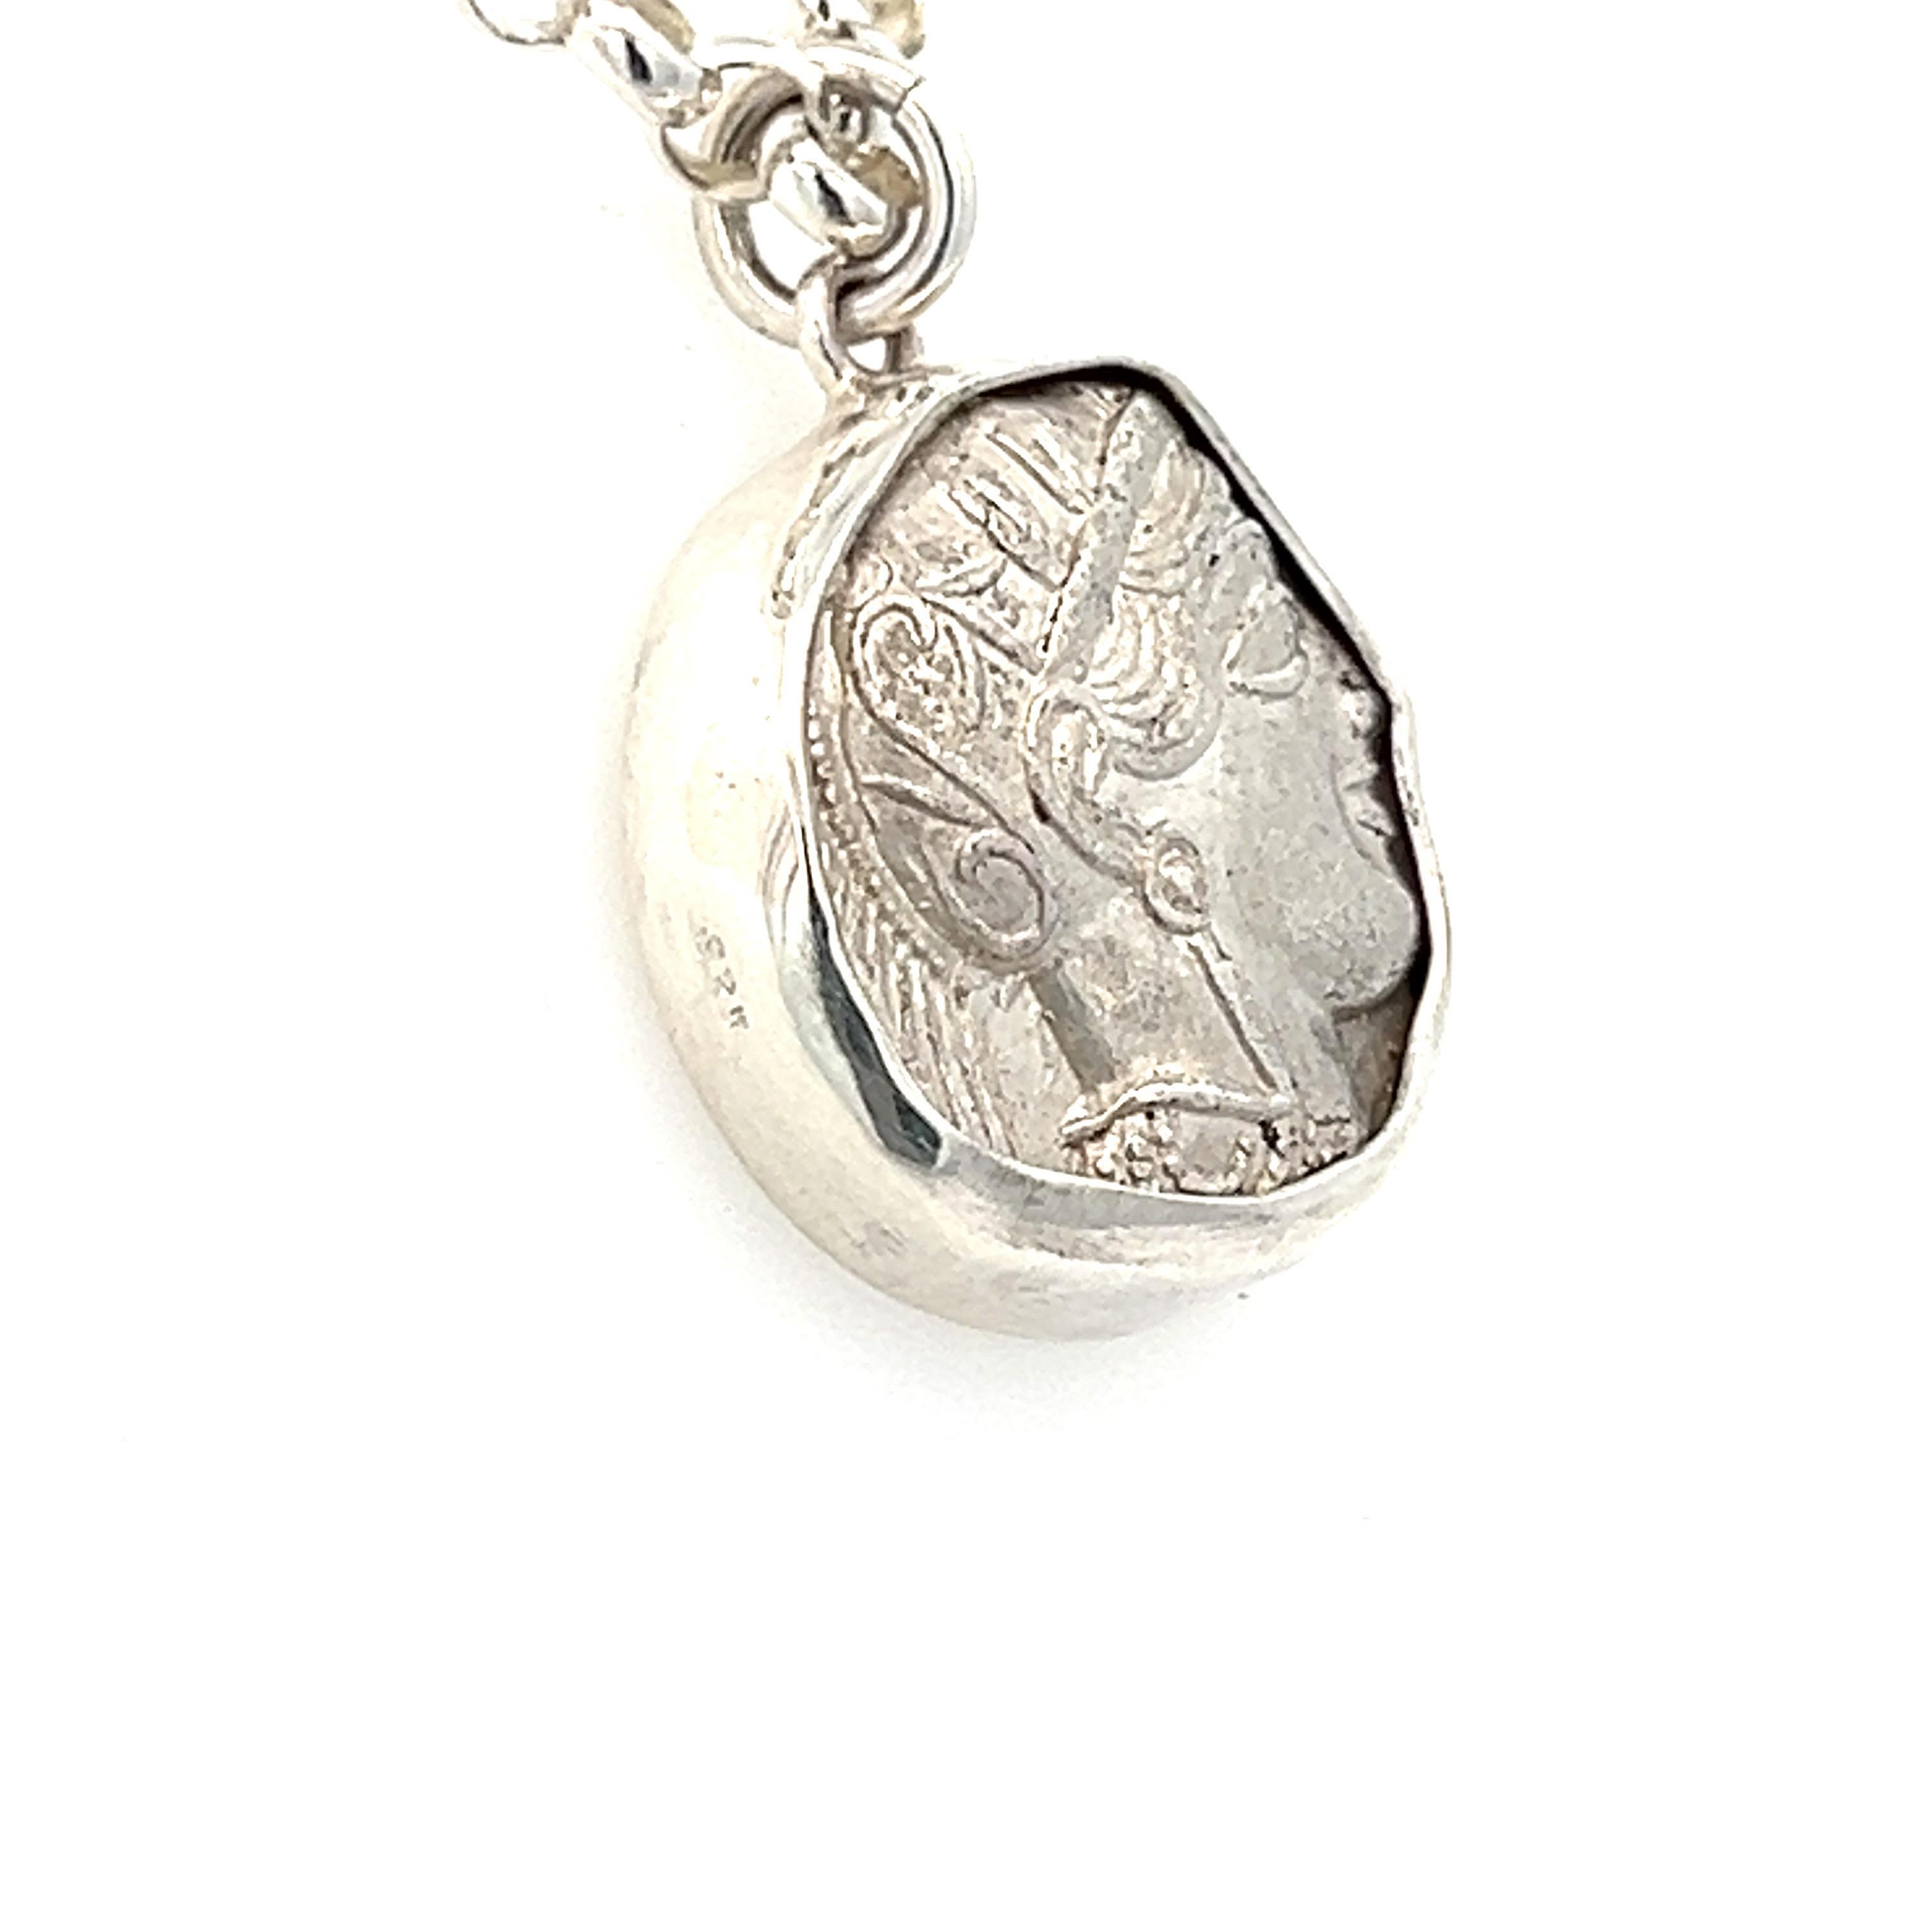 A one-of-a-kind necklace pendant created by London-based jewellery designers, Hasbani Diamonds, that combines ancient history with modern craftsmanship. The centerpiece of this stunning piece is a bespoke genuine Ancient Greek Athenian tetradrachm,